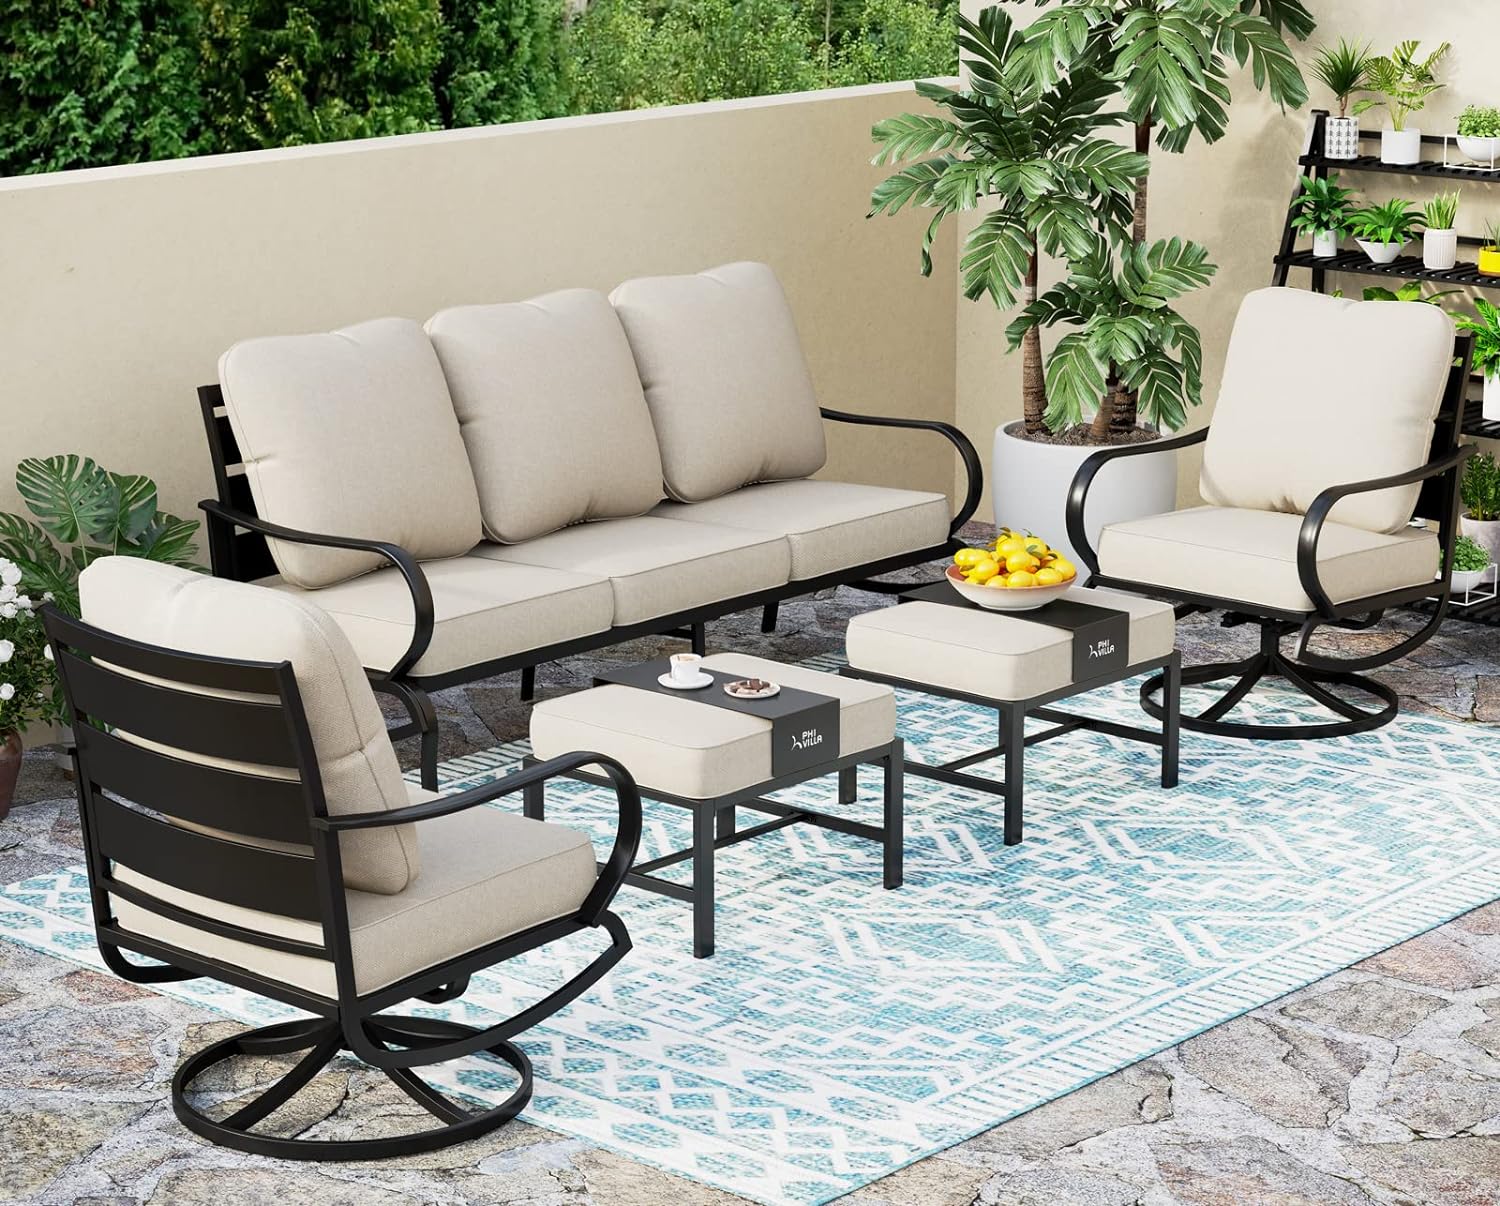 PHI VILLA 5 PCS Patio Furniture Sets with 1 x 3 Seater 5.75 Cushioned Deep Seating Bench, 2 x Swivel Sofa Chairs & 2 x Metal Cushioned Ottoman, Outdoor Furniture Deluxe Patio Set for Garden